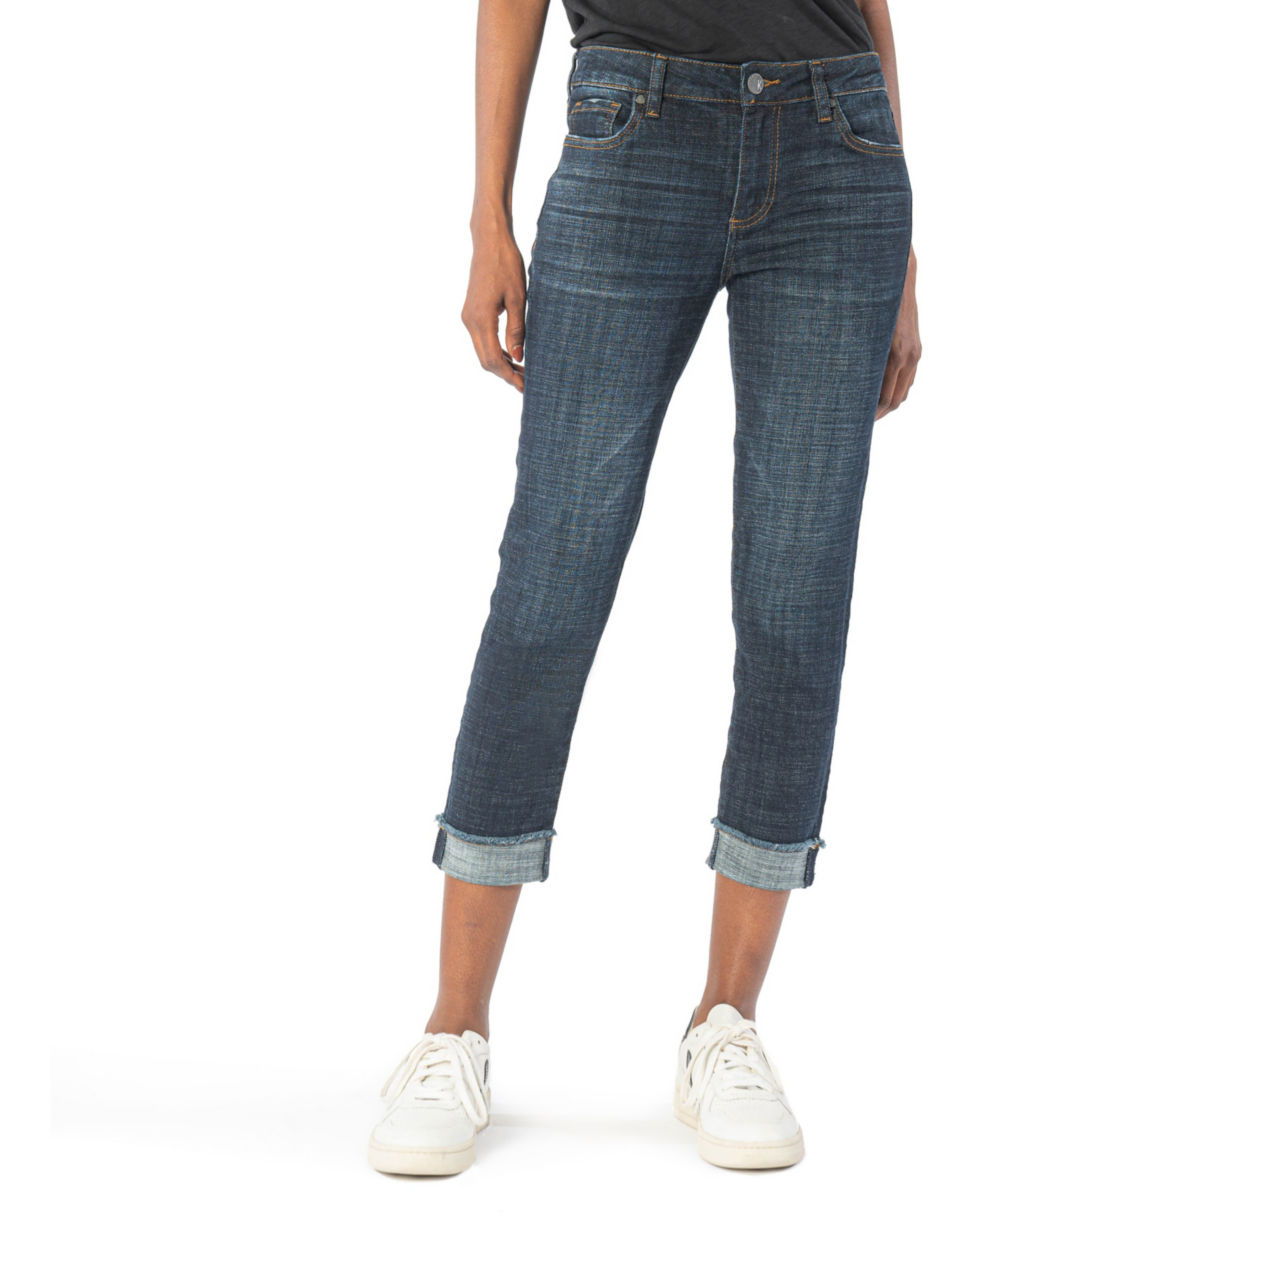 Kut from the Kloth® Amy Crop Jeans - ACKNOWLEDGING image number 0